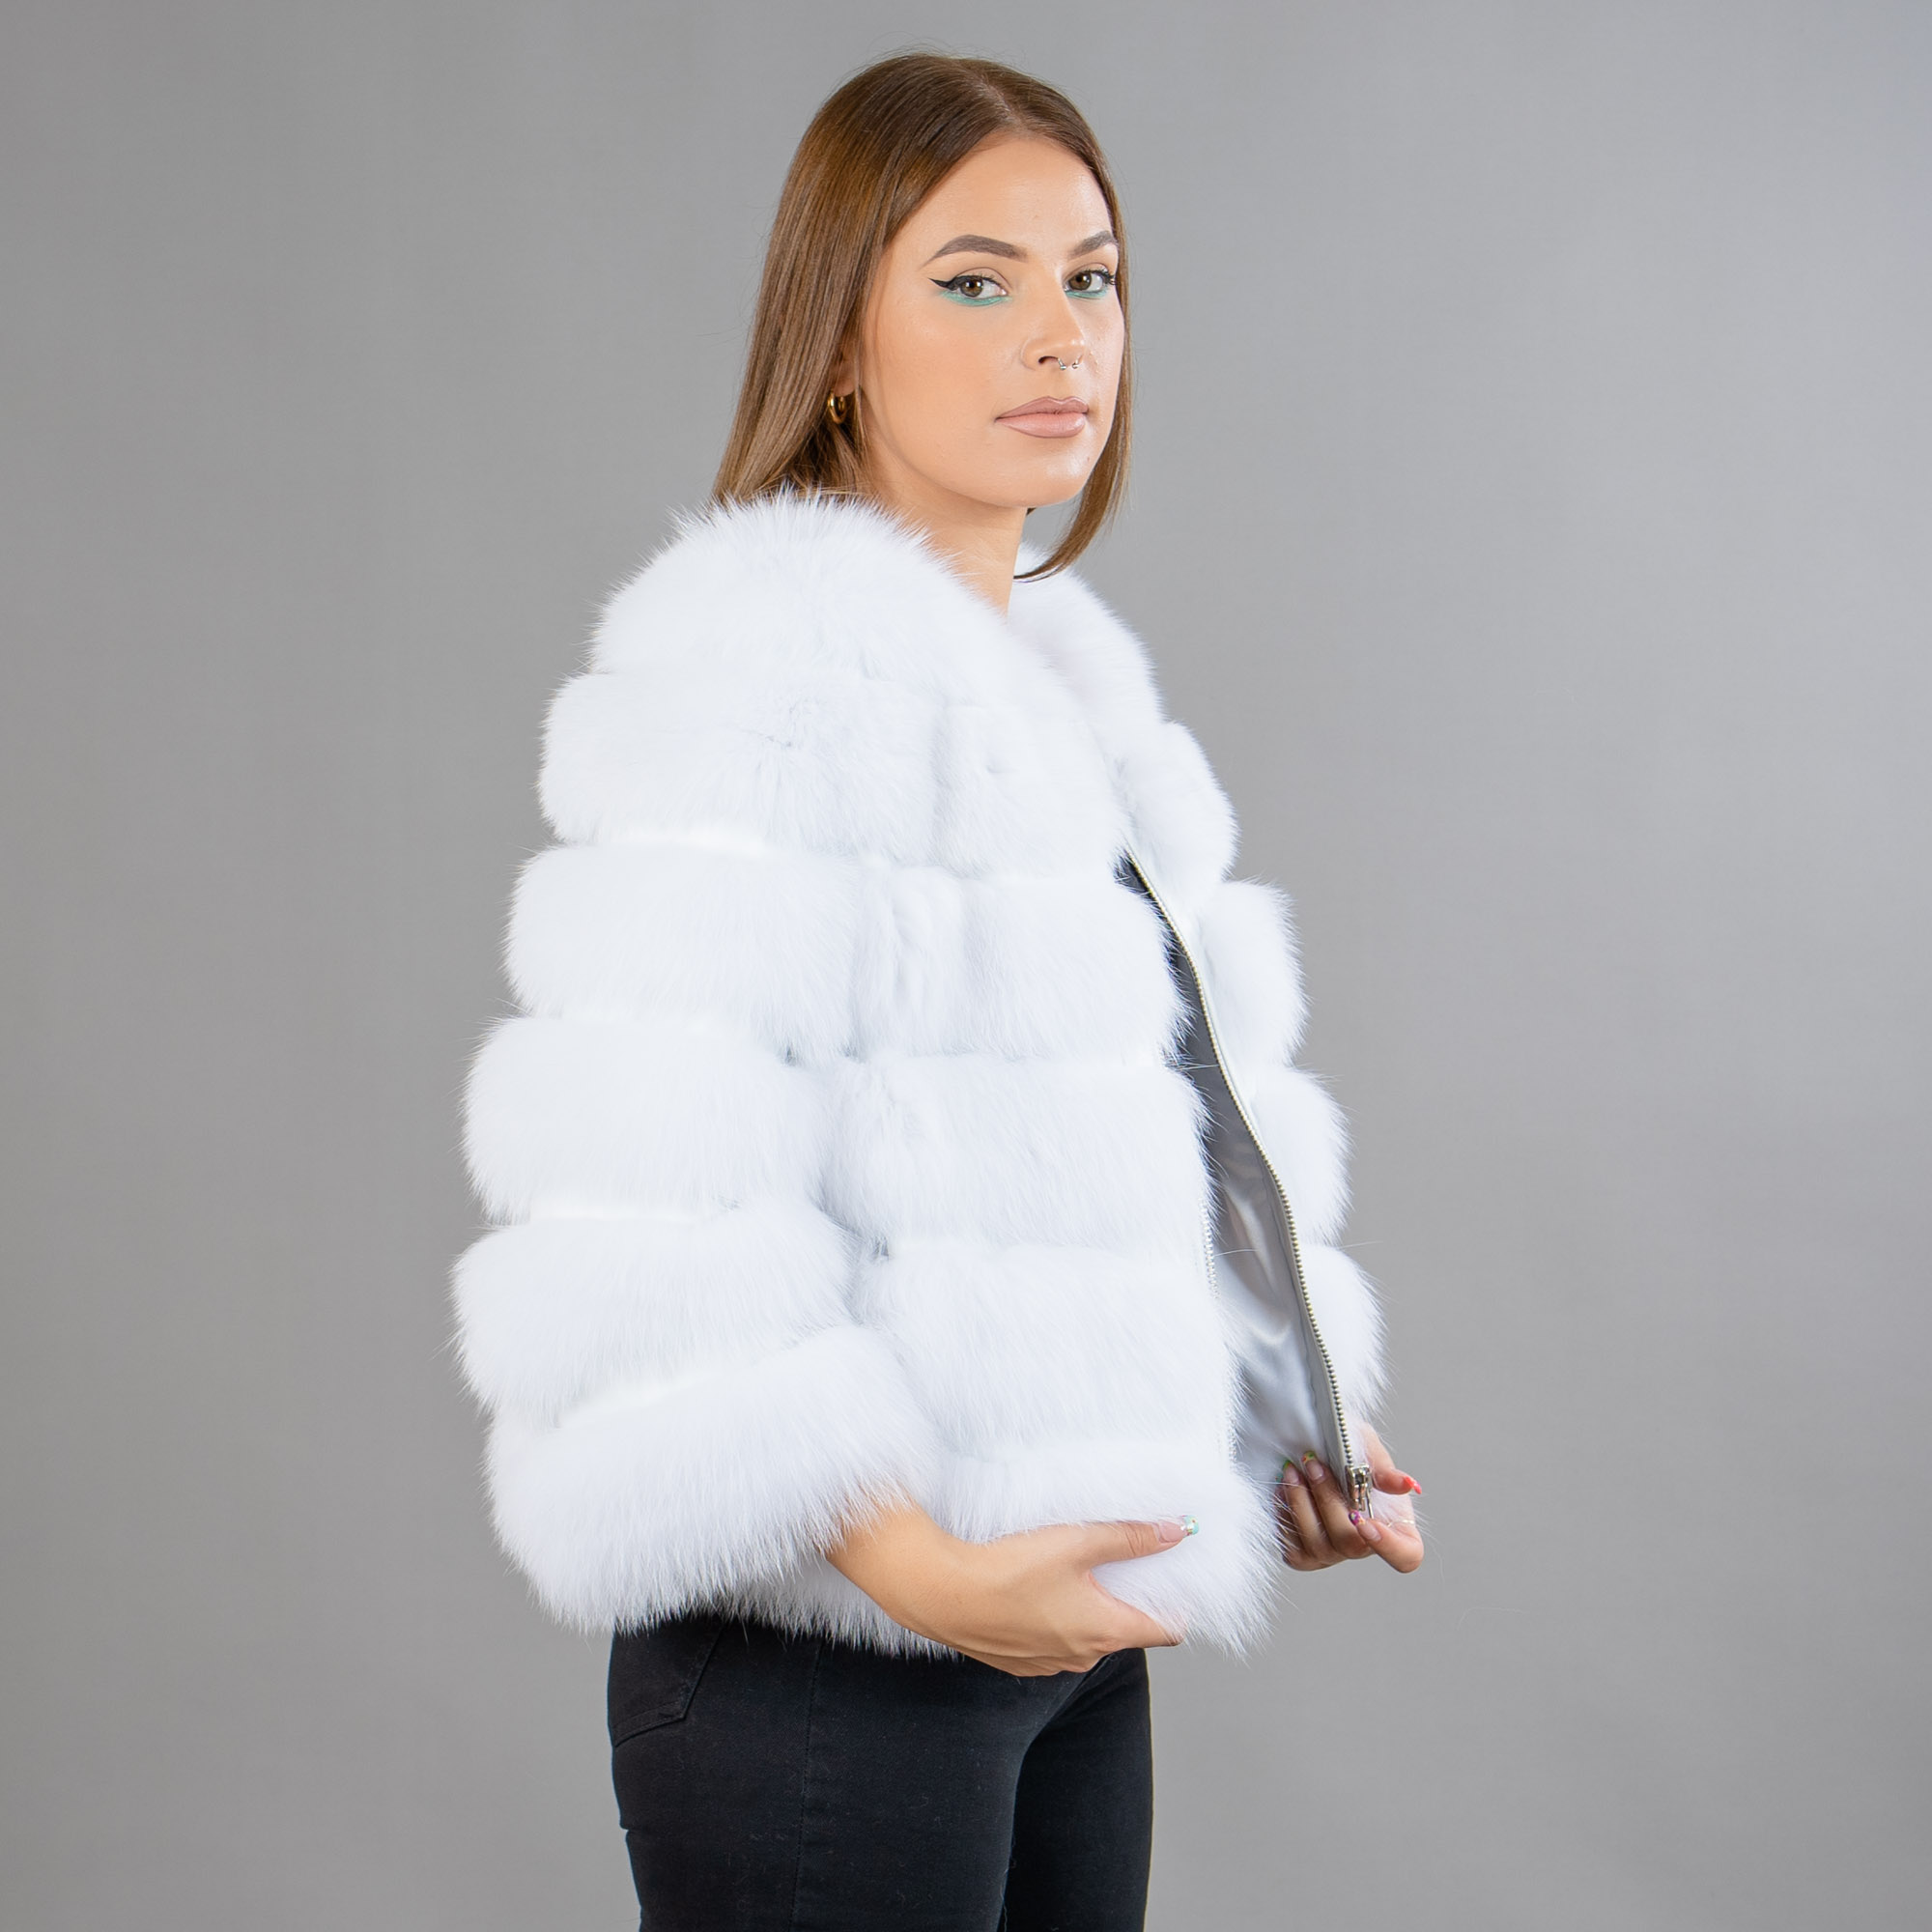 White fox fur jacket with leather details. 